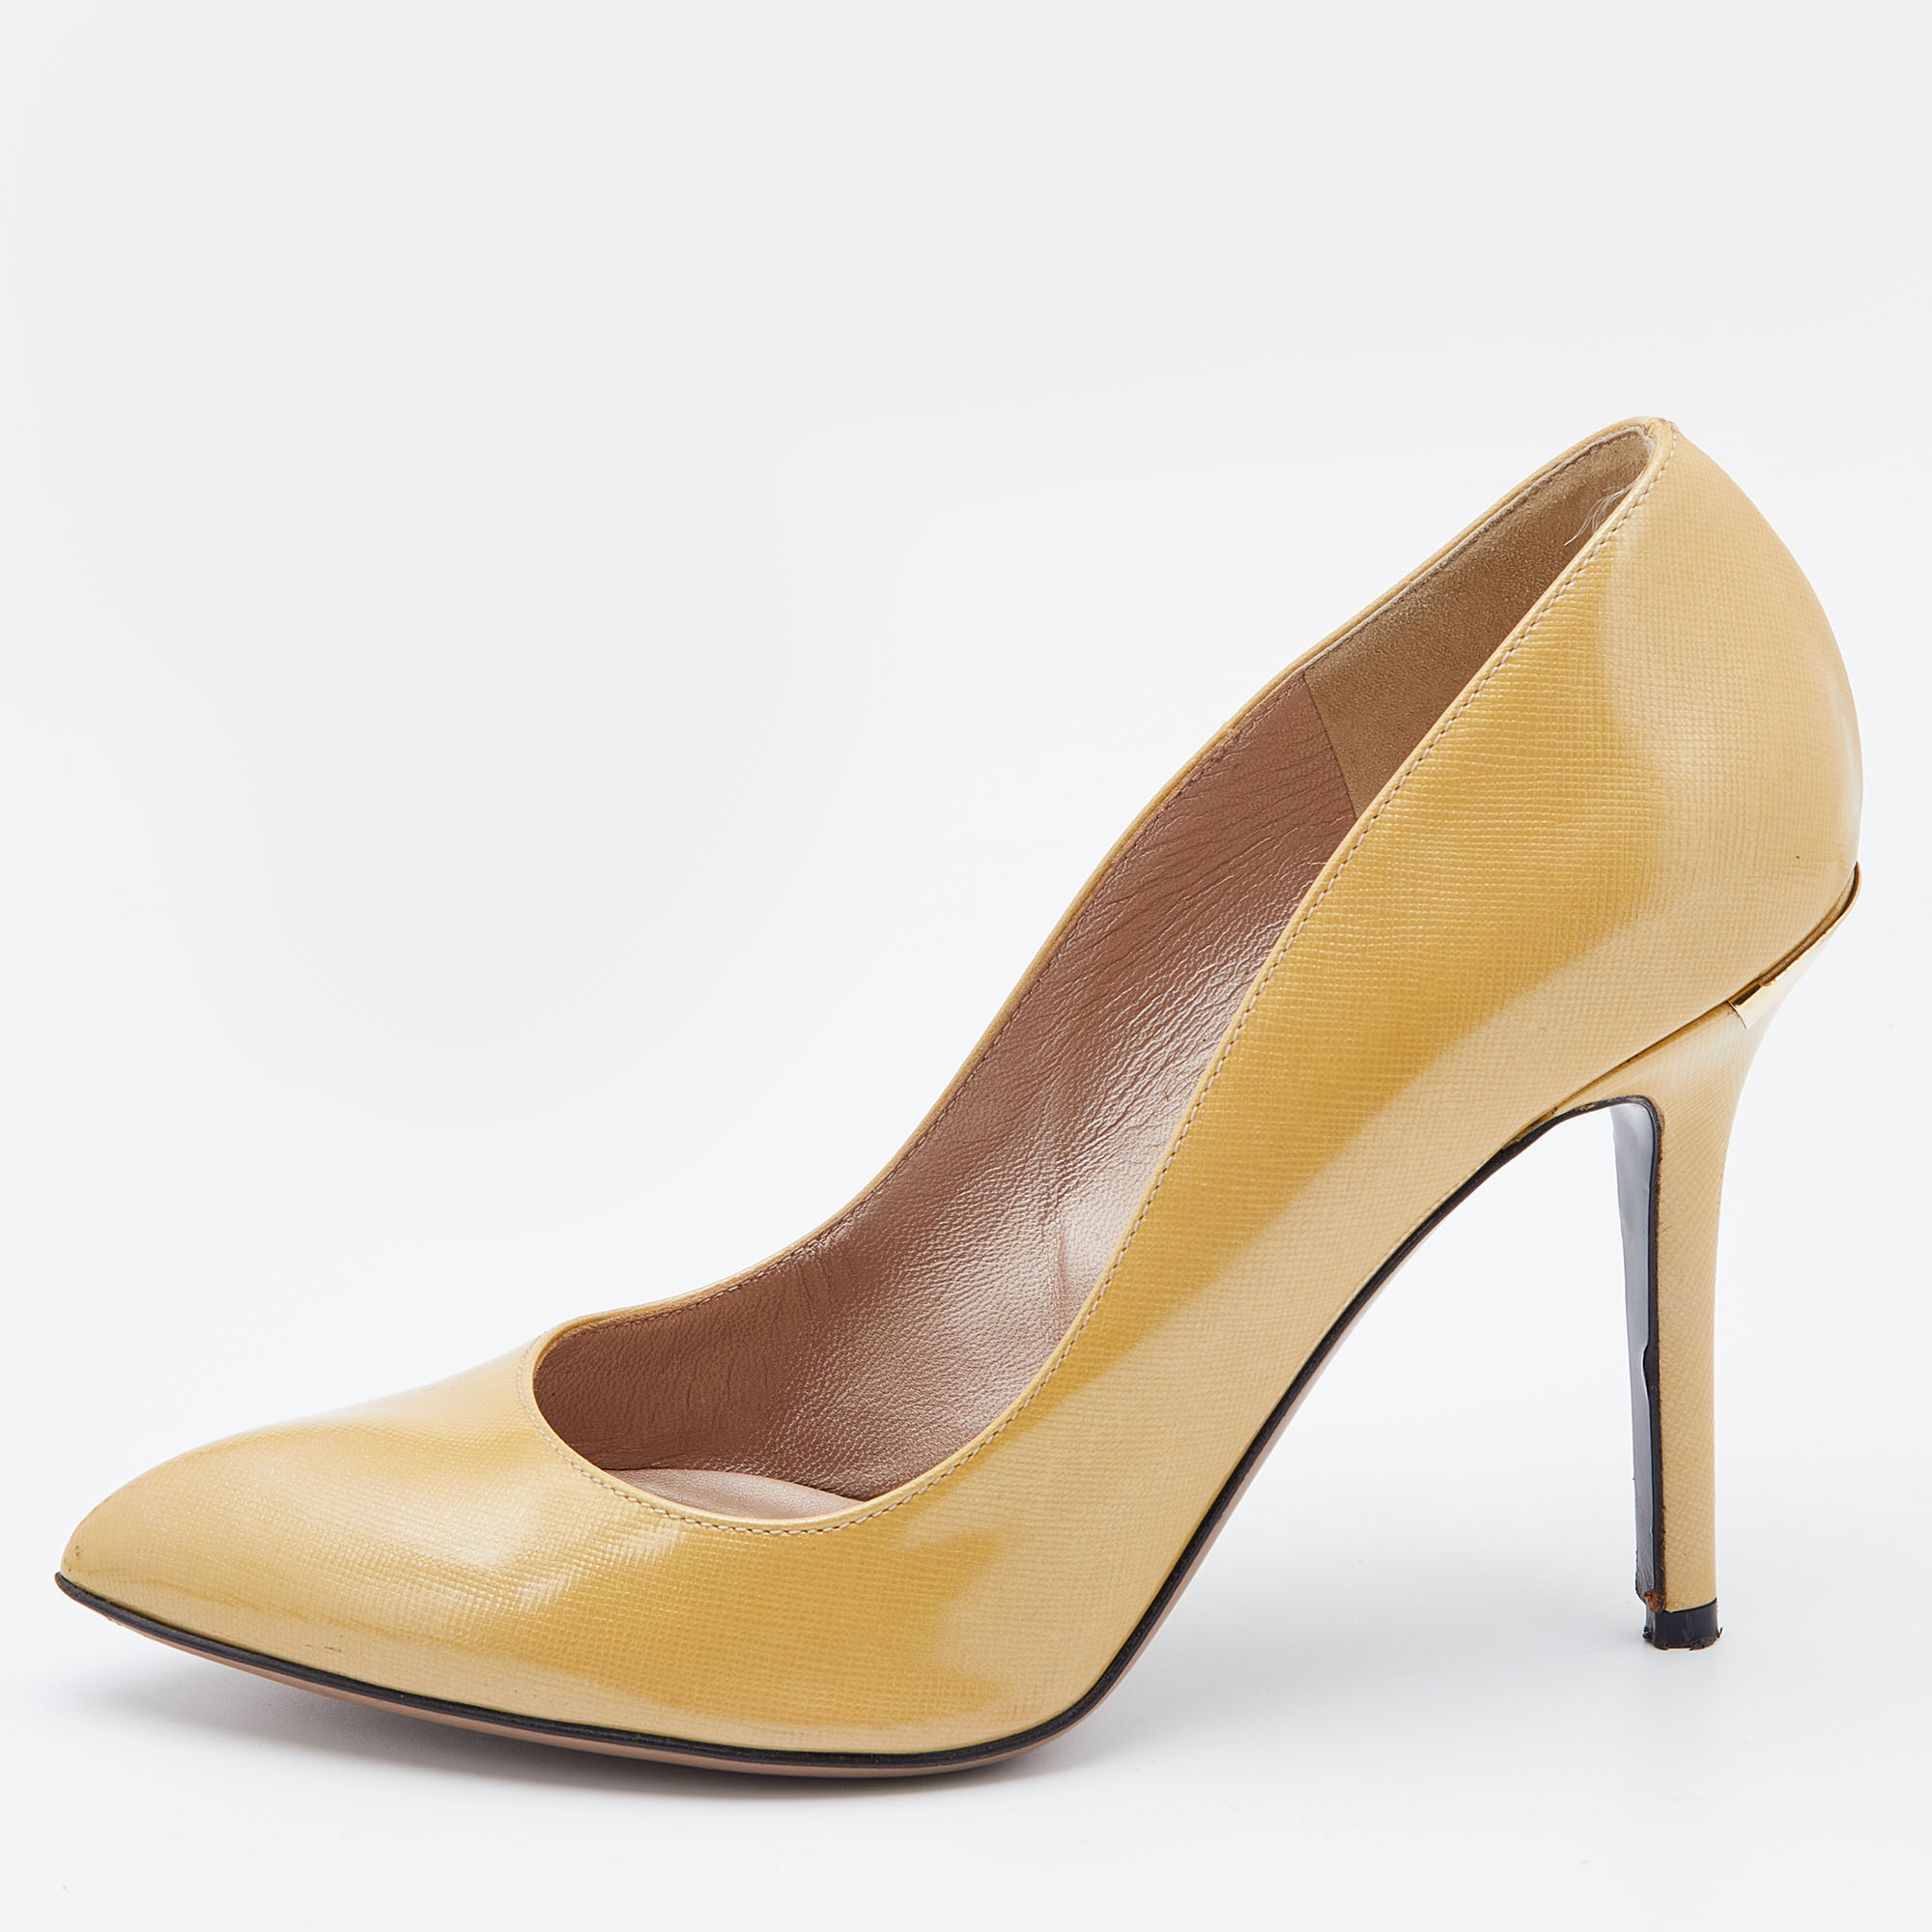 Versace Light Yellow Patent Leather Pointed Toe Pumps Size 38